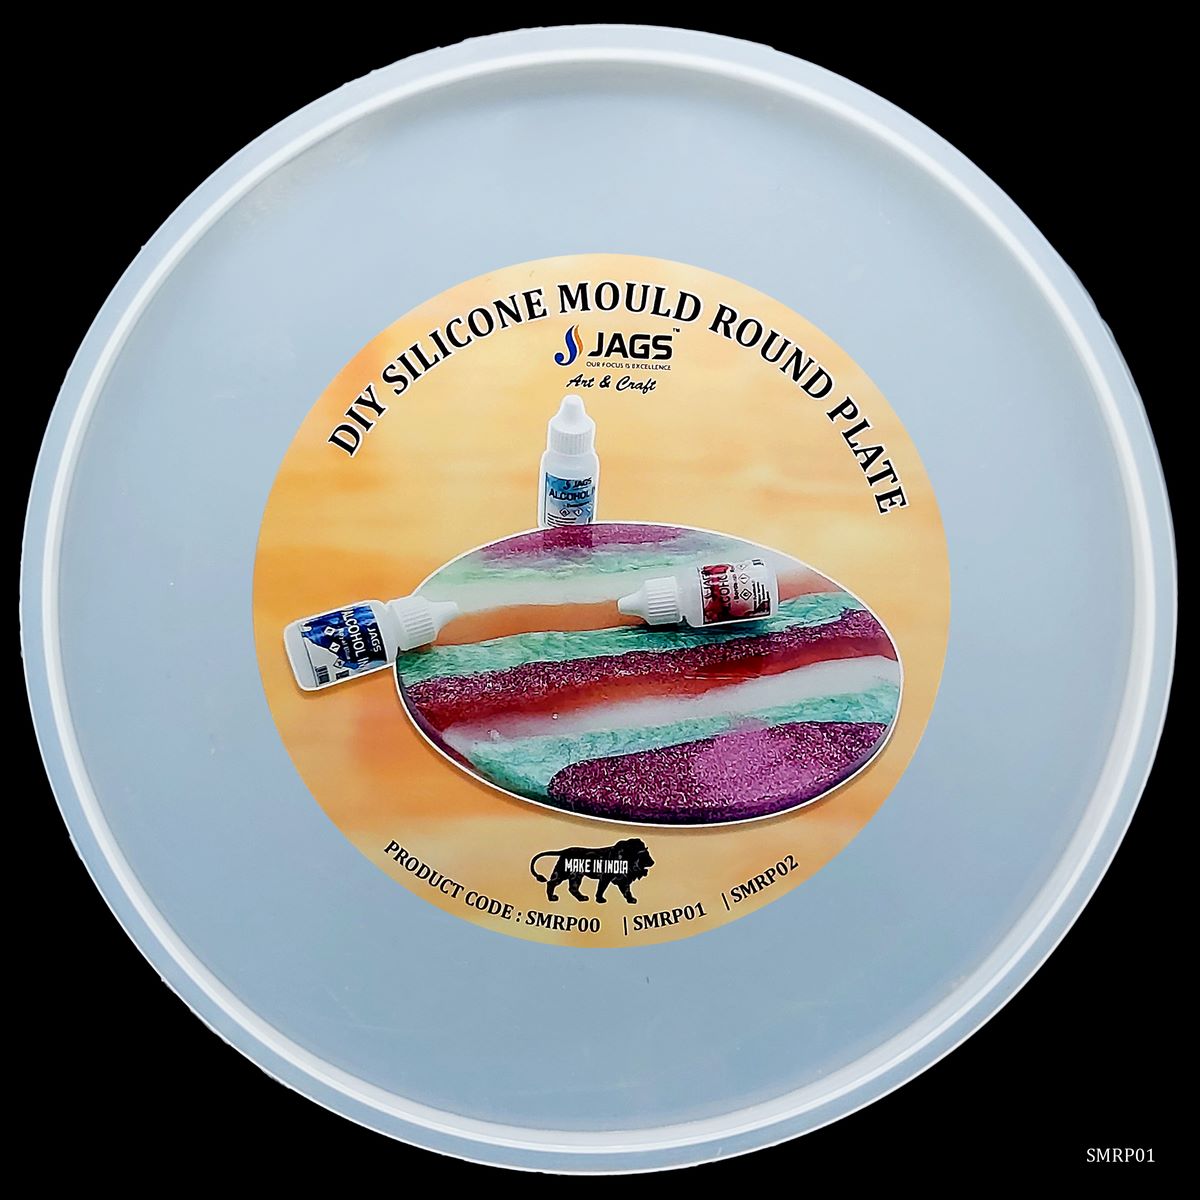 jags-mumbai Mould Silicone Mould Round Plate 10inch SMRP01